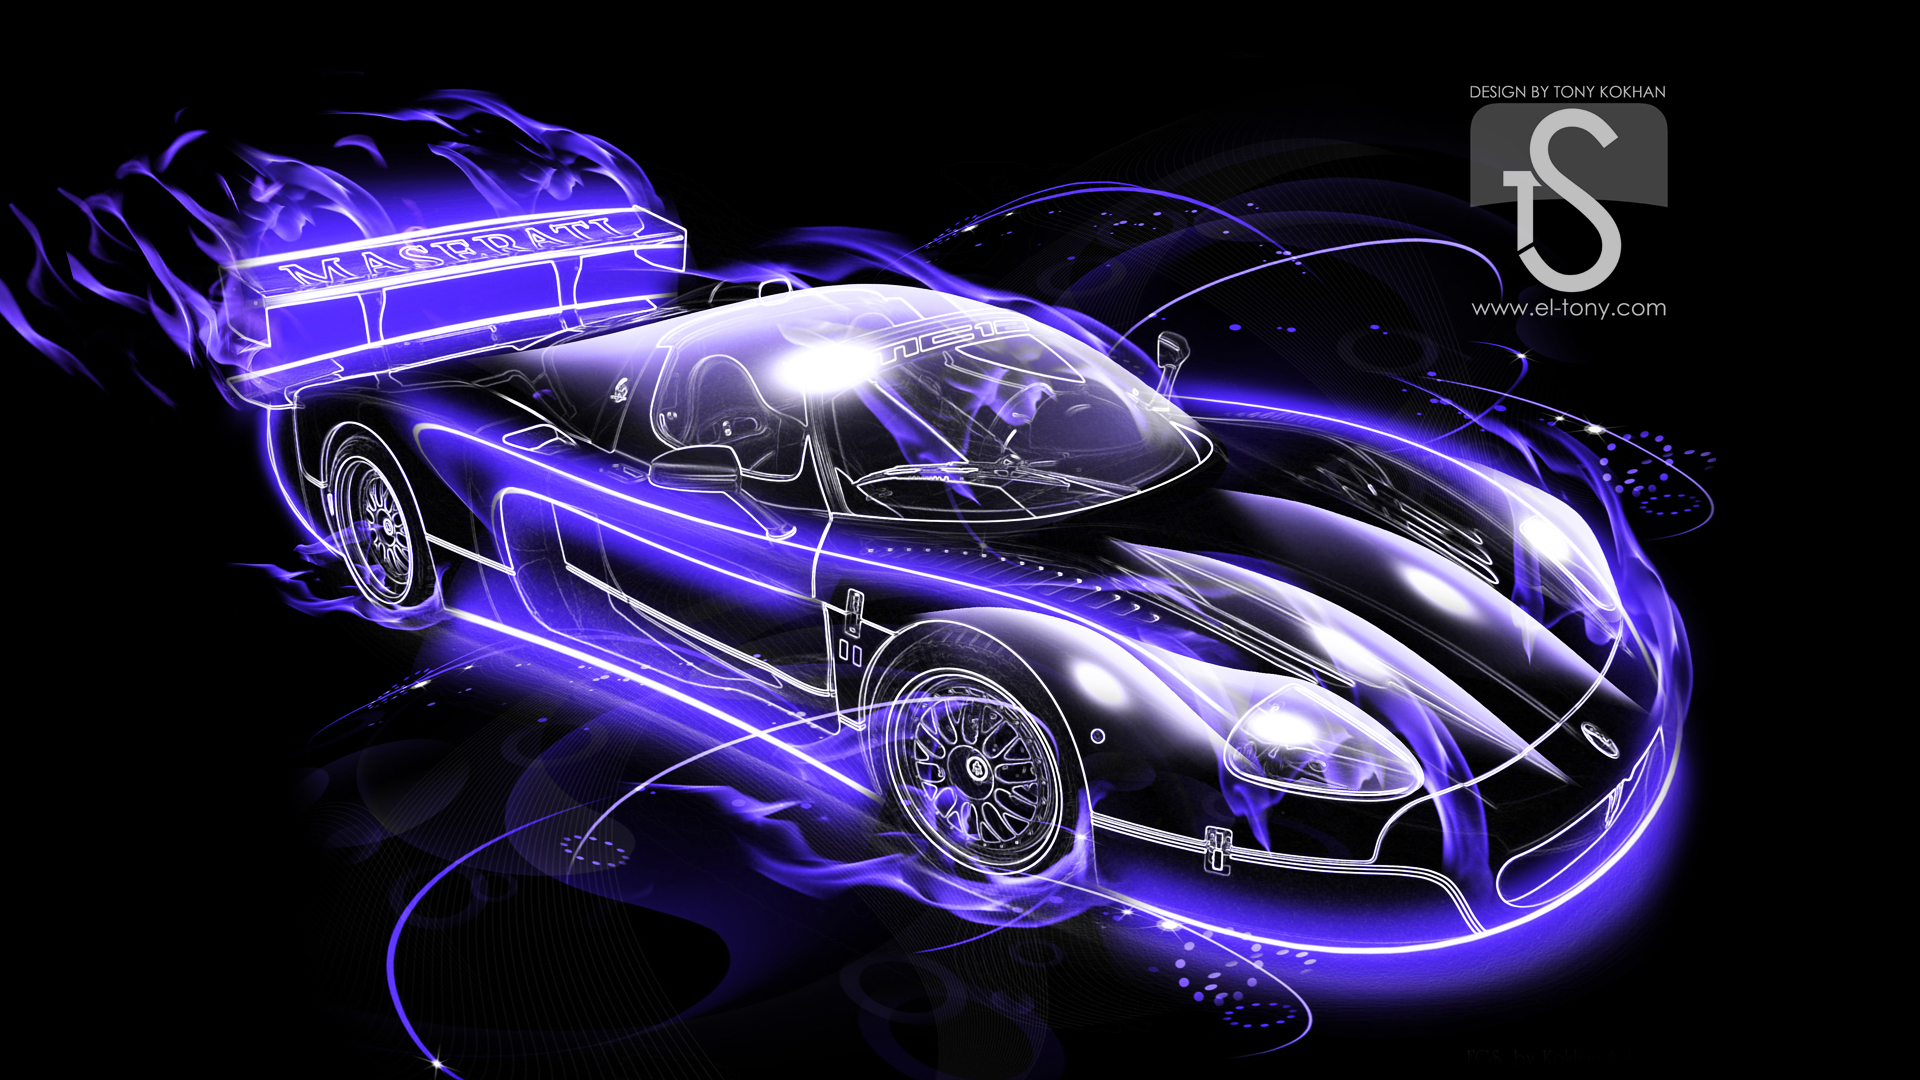 Abstract Purple Car-Wallpaper 1080p Free HD Resolutions - 9to5 Car